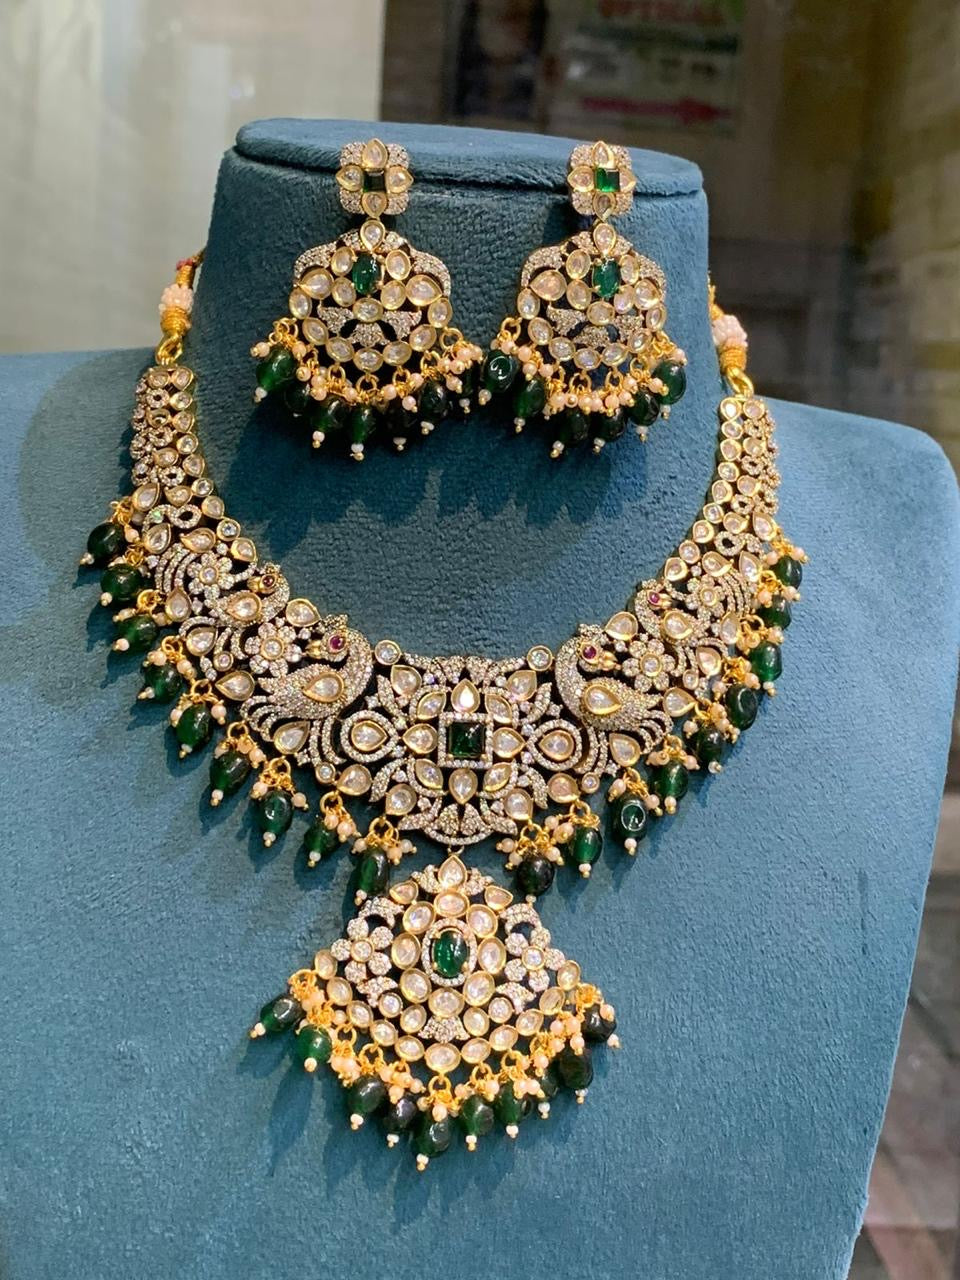 Bridal Victorian Opulence: Elegant Cz Stone Peacock Necklace with Earrings